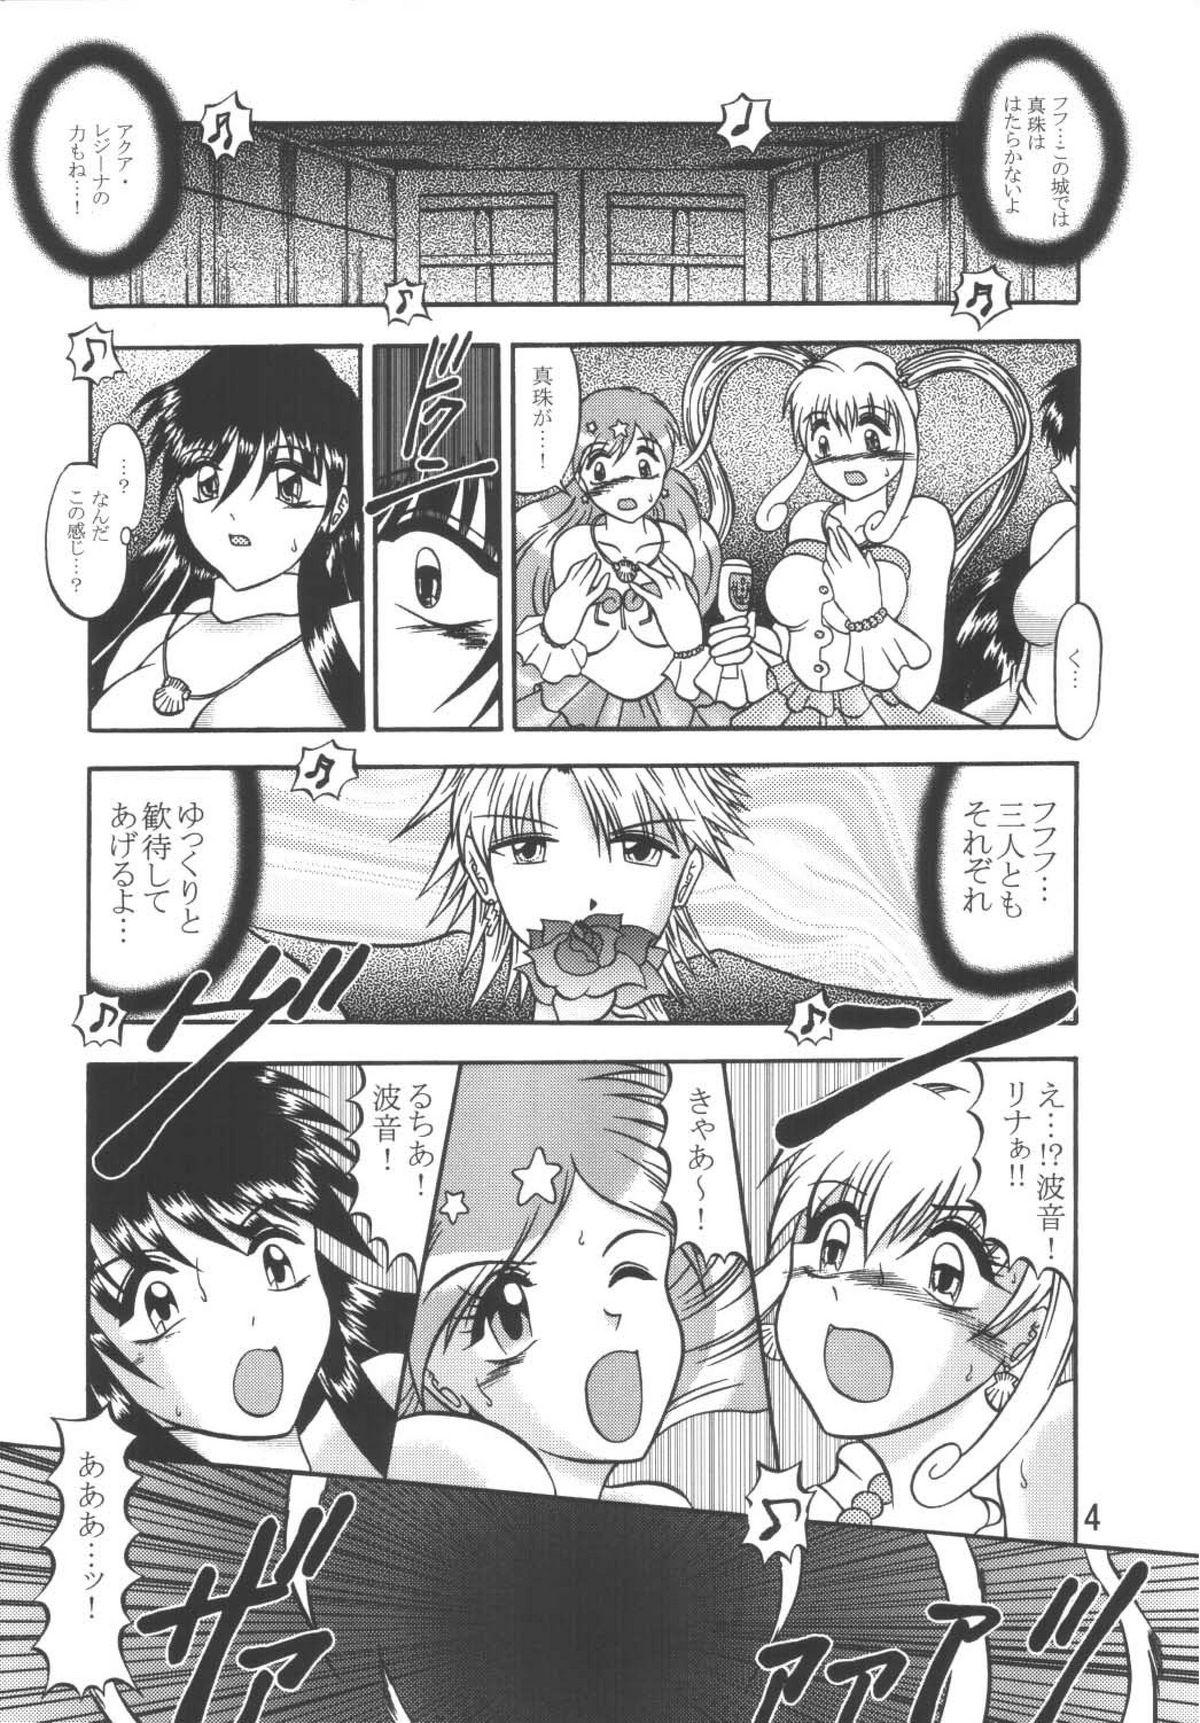 Rough Porn VOICE in the DARK - Mermaid melody pichi pichi pitch Best Blowjob - Page 4